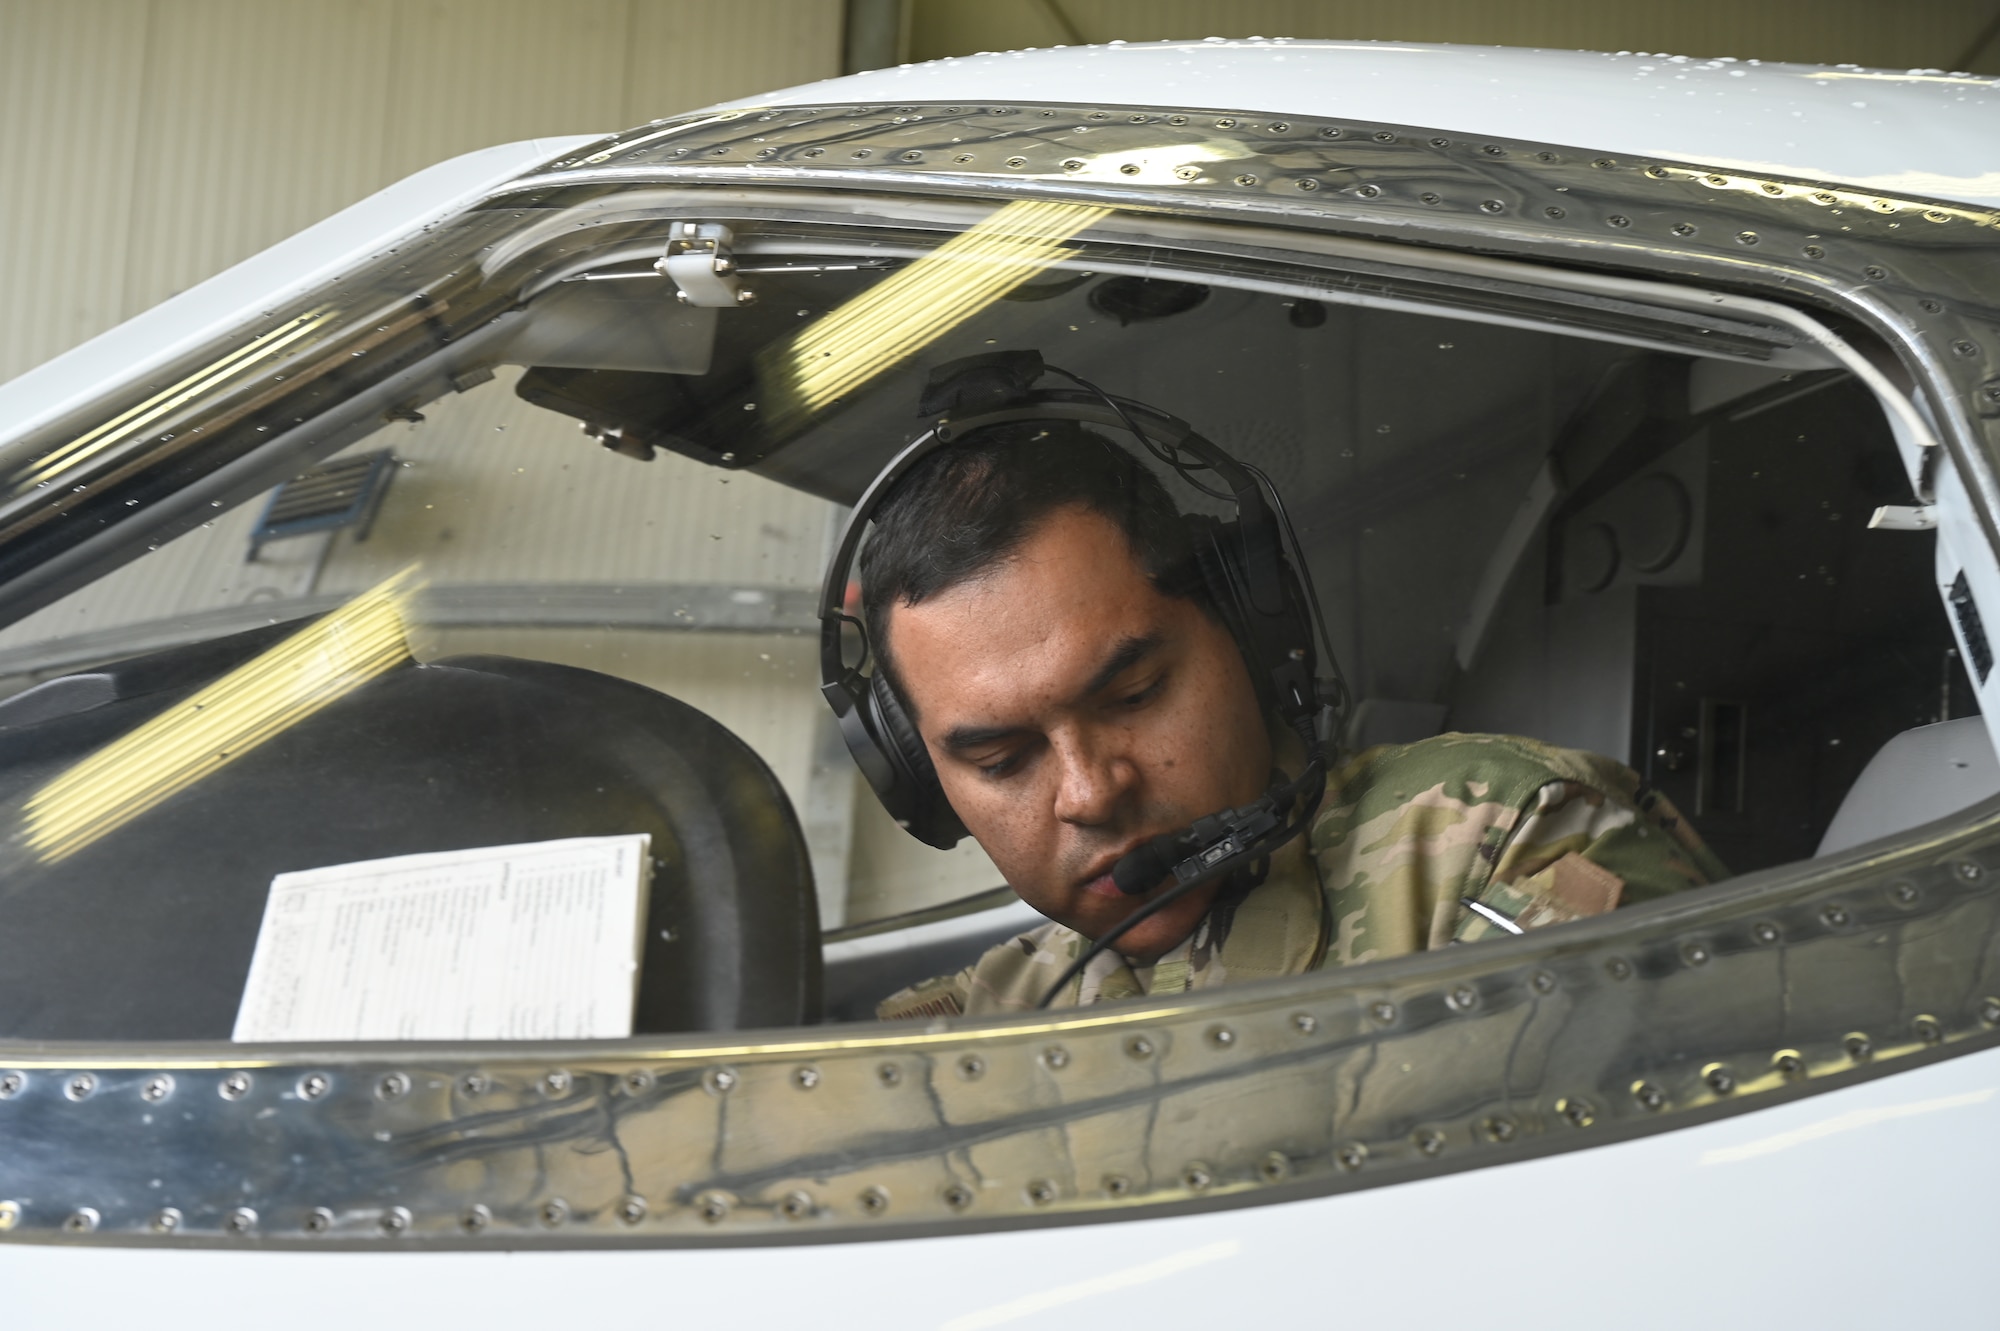 U.S Air Force Maj. Luis Garces, United States Air Forces in Europe standards and evaluations officer, performs pre-flight checks on a C-21aircraft assigned to the 76th Airlift Squadron at Ramstein Air Base, Germany, July 8 2021. The 76th Airlift Squadron transports high ranking military and civilian officials across and outside the European theater to conduct business on behalf of the U.S. military. (U.S. Air Force photo by Senior Airman Thomas Karol)